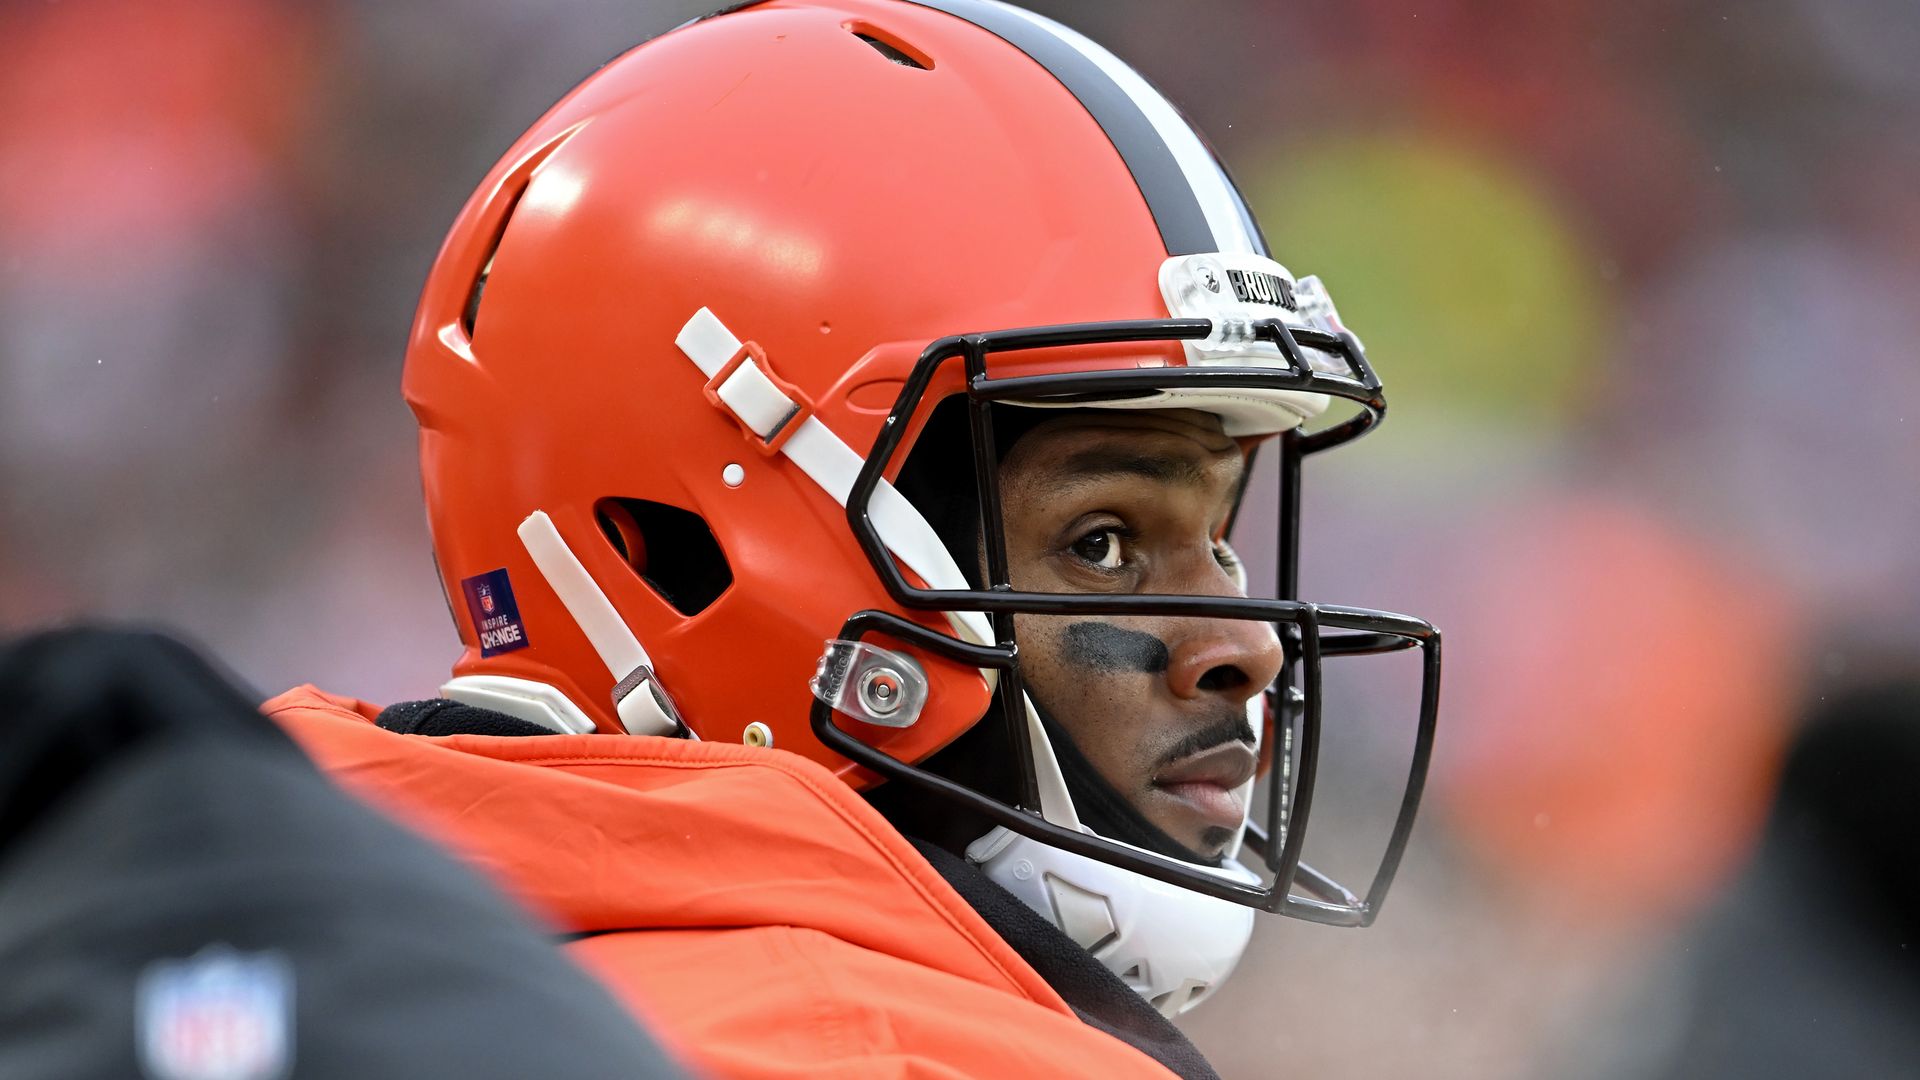 Browns quarterback Deshaun Watson sits on the bench with his helmet on.